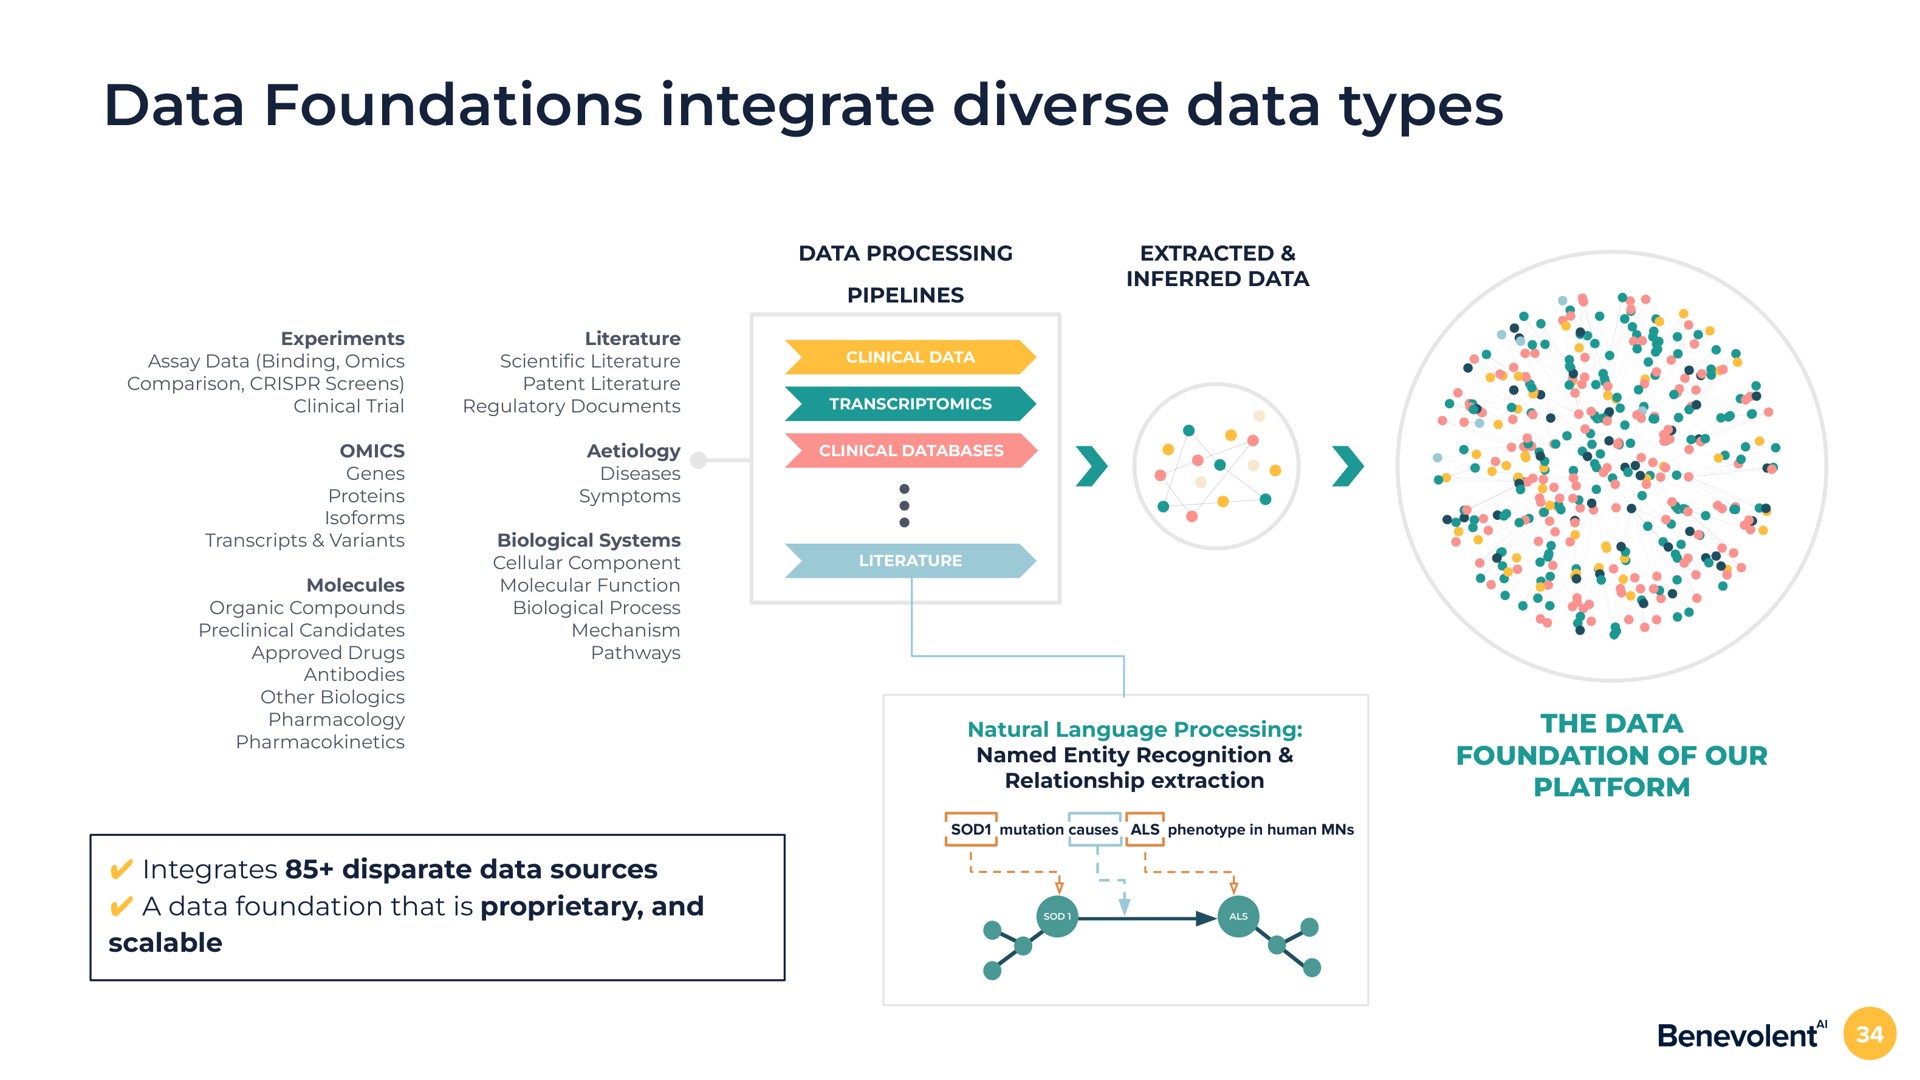 data foundations integrate diverse data types the data foundation of our platform integrates disparate data sources a data foundation that is proprietary and scalable | BenevolentAI